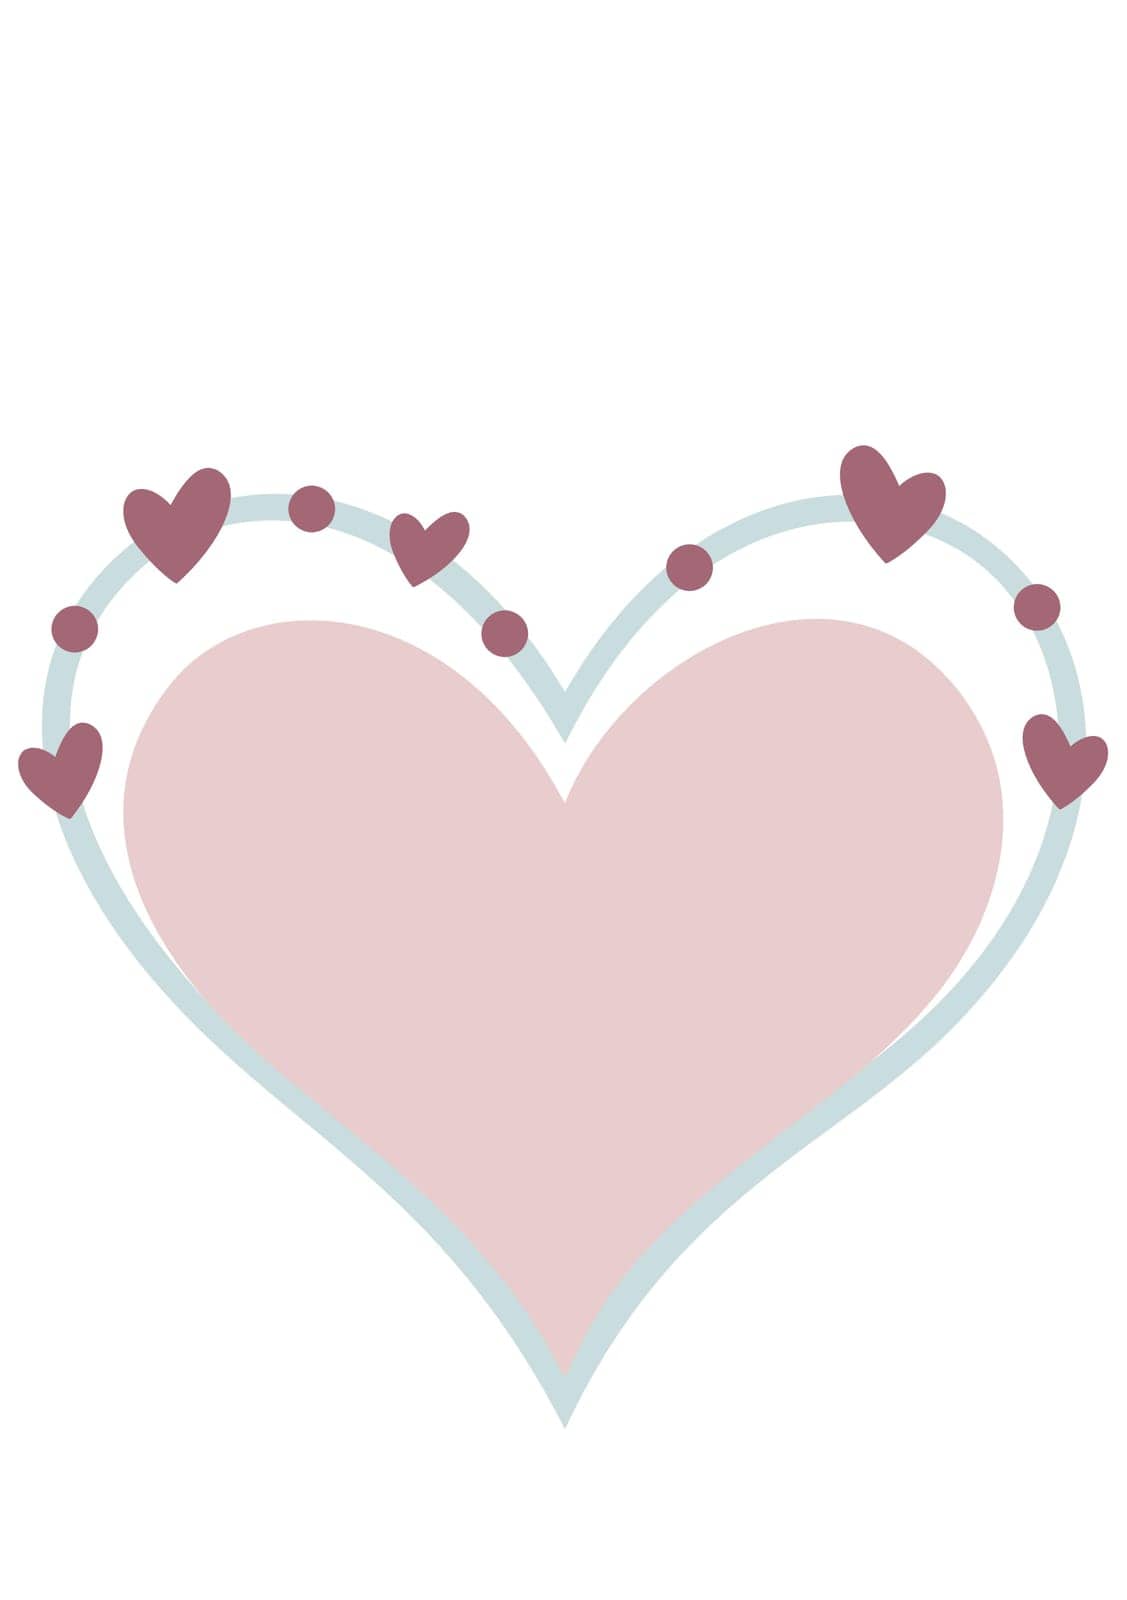 Boho heart with transparent background